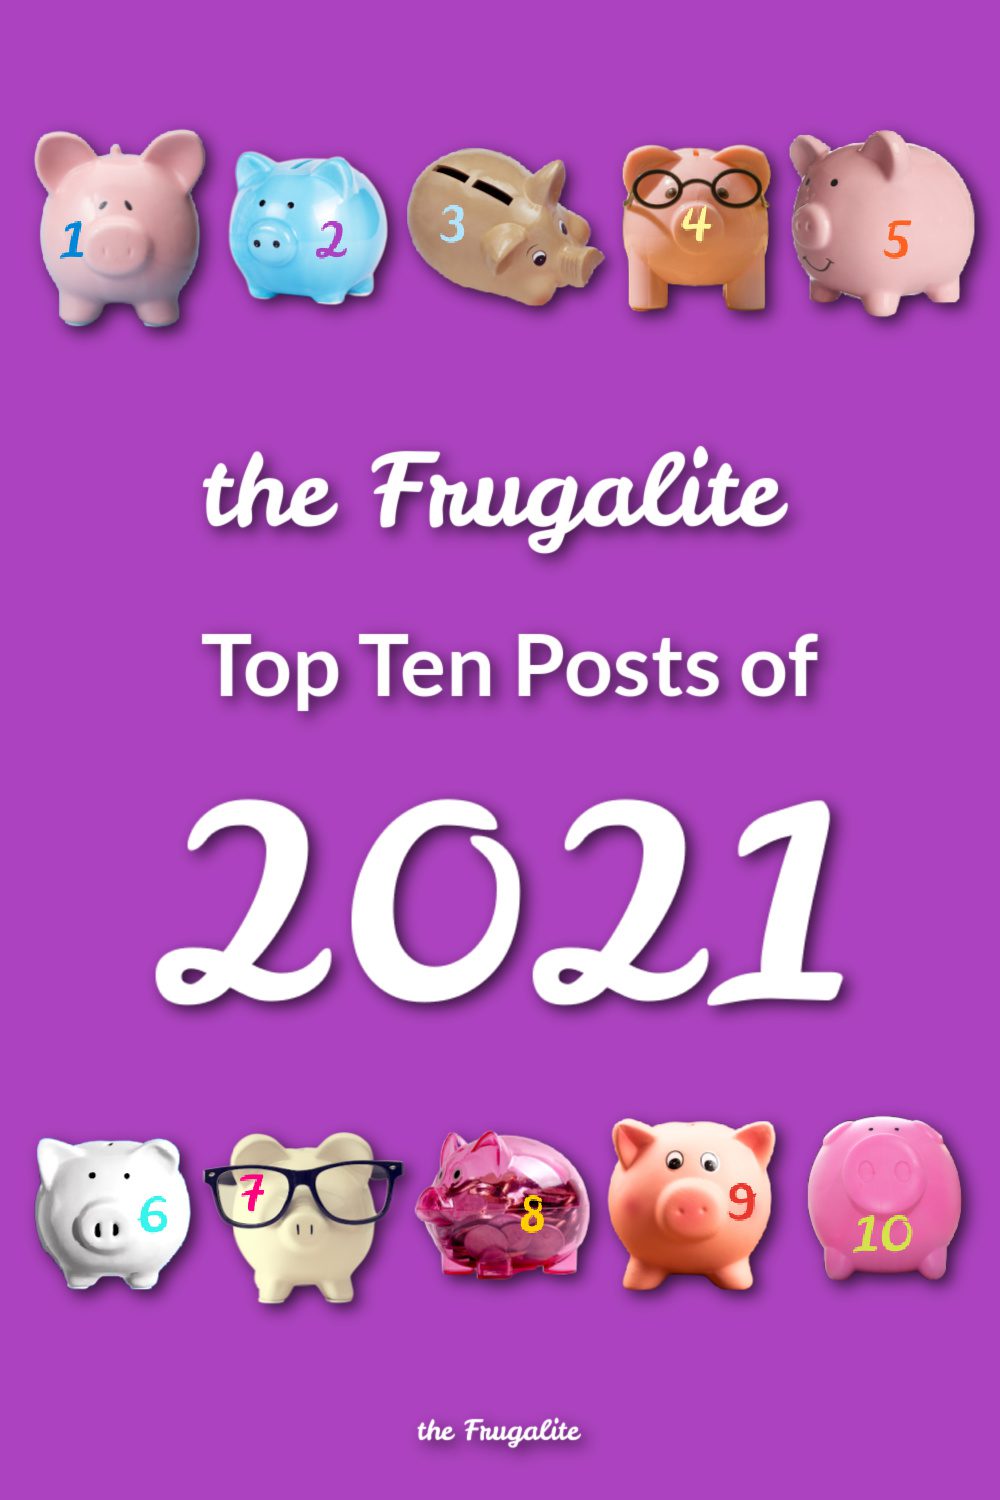 The Top Ten Posts of 2021 at The Frugalite